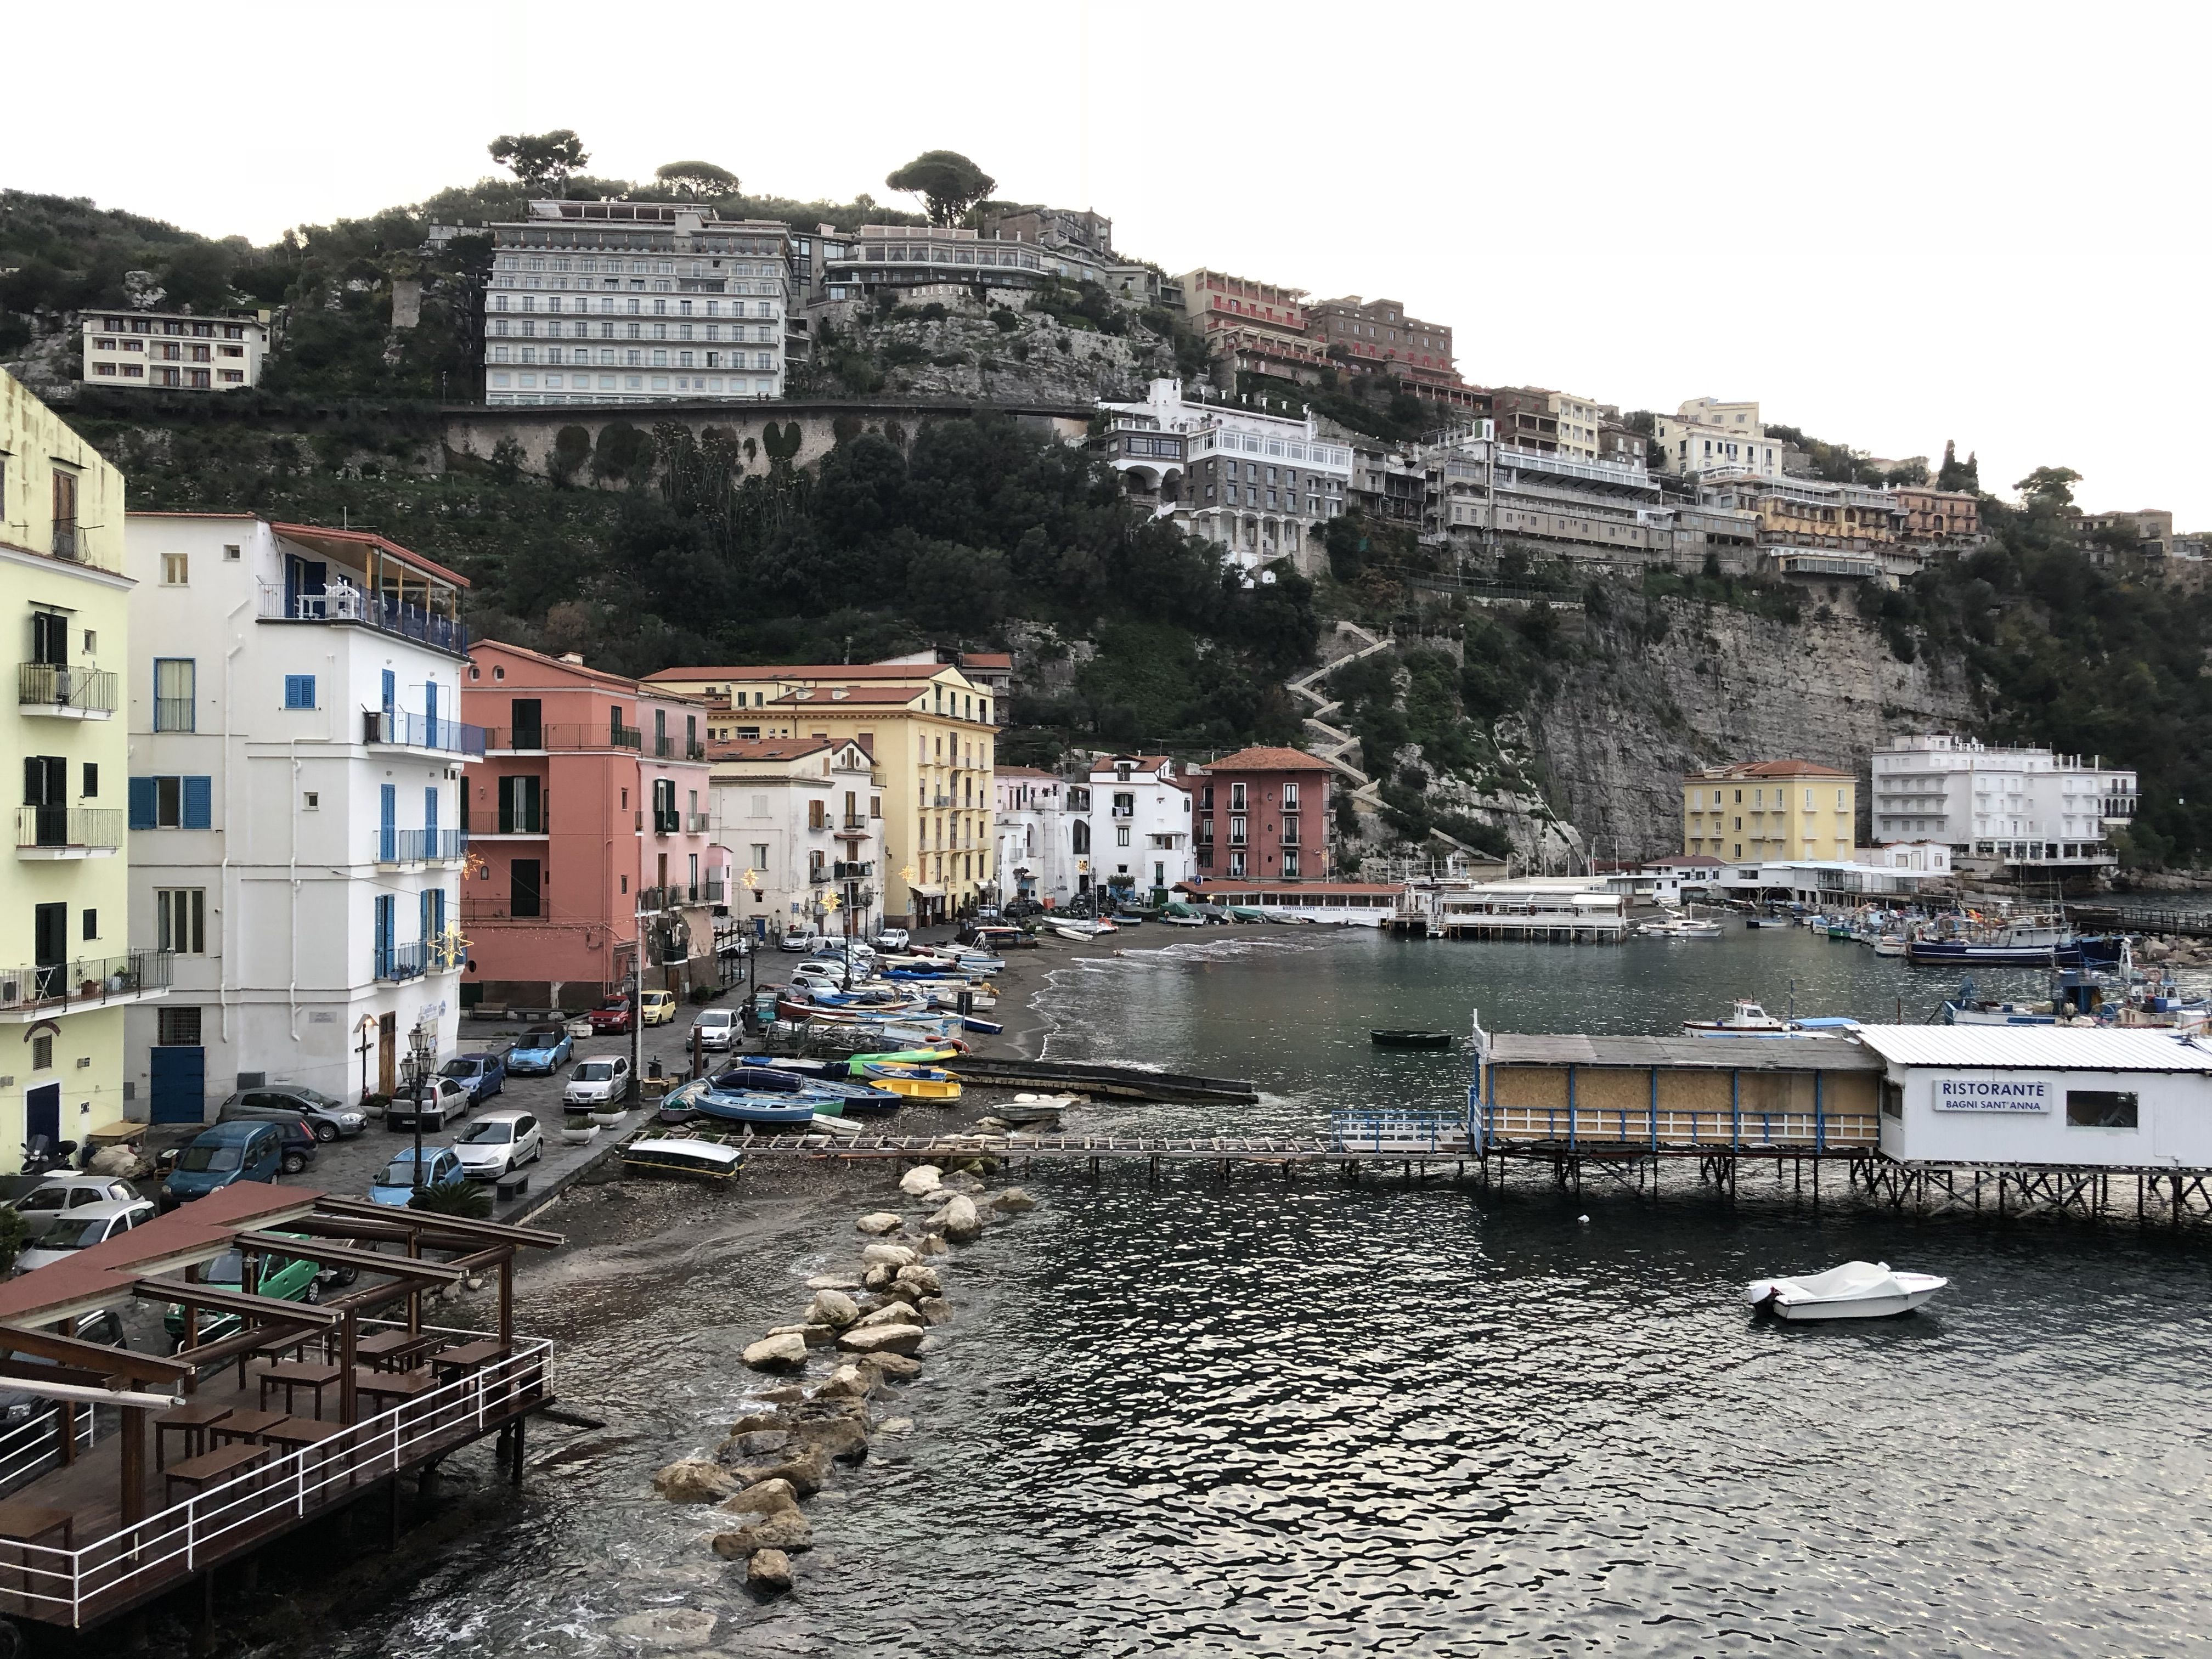 Down at the waterfront. There's a pier with a little white wooden  restaurant at the end. Boats in the water. Just back from the water, a row of hotels. And looming above, at the top of a cliff, a row of hotels and apartment buildings.